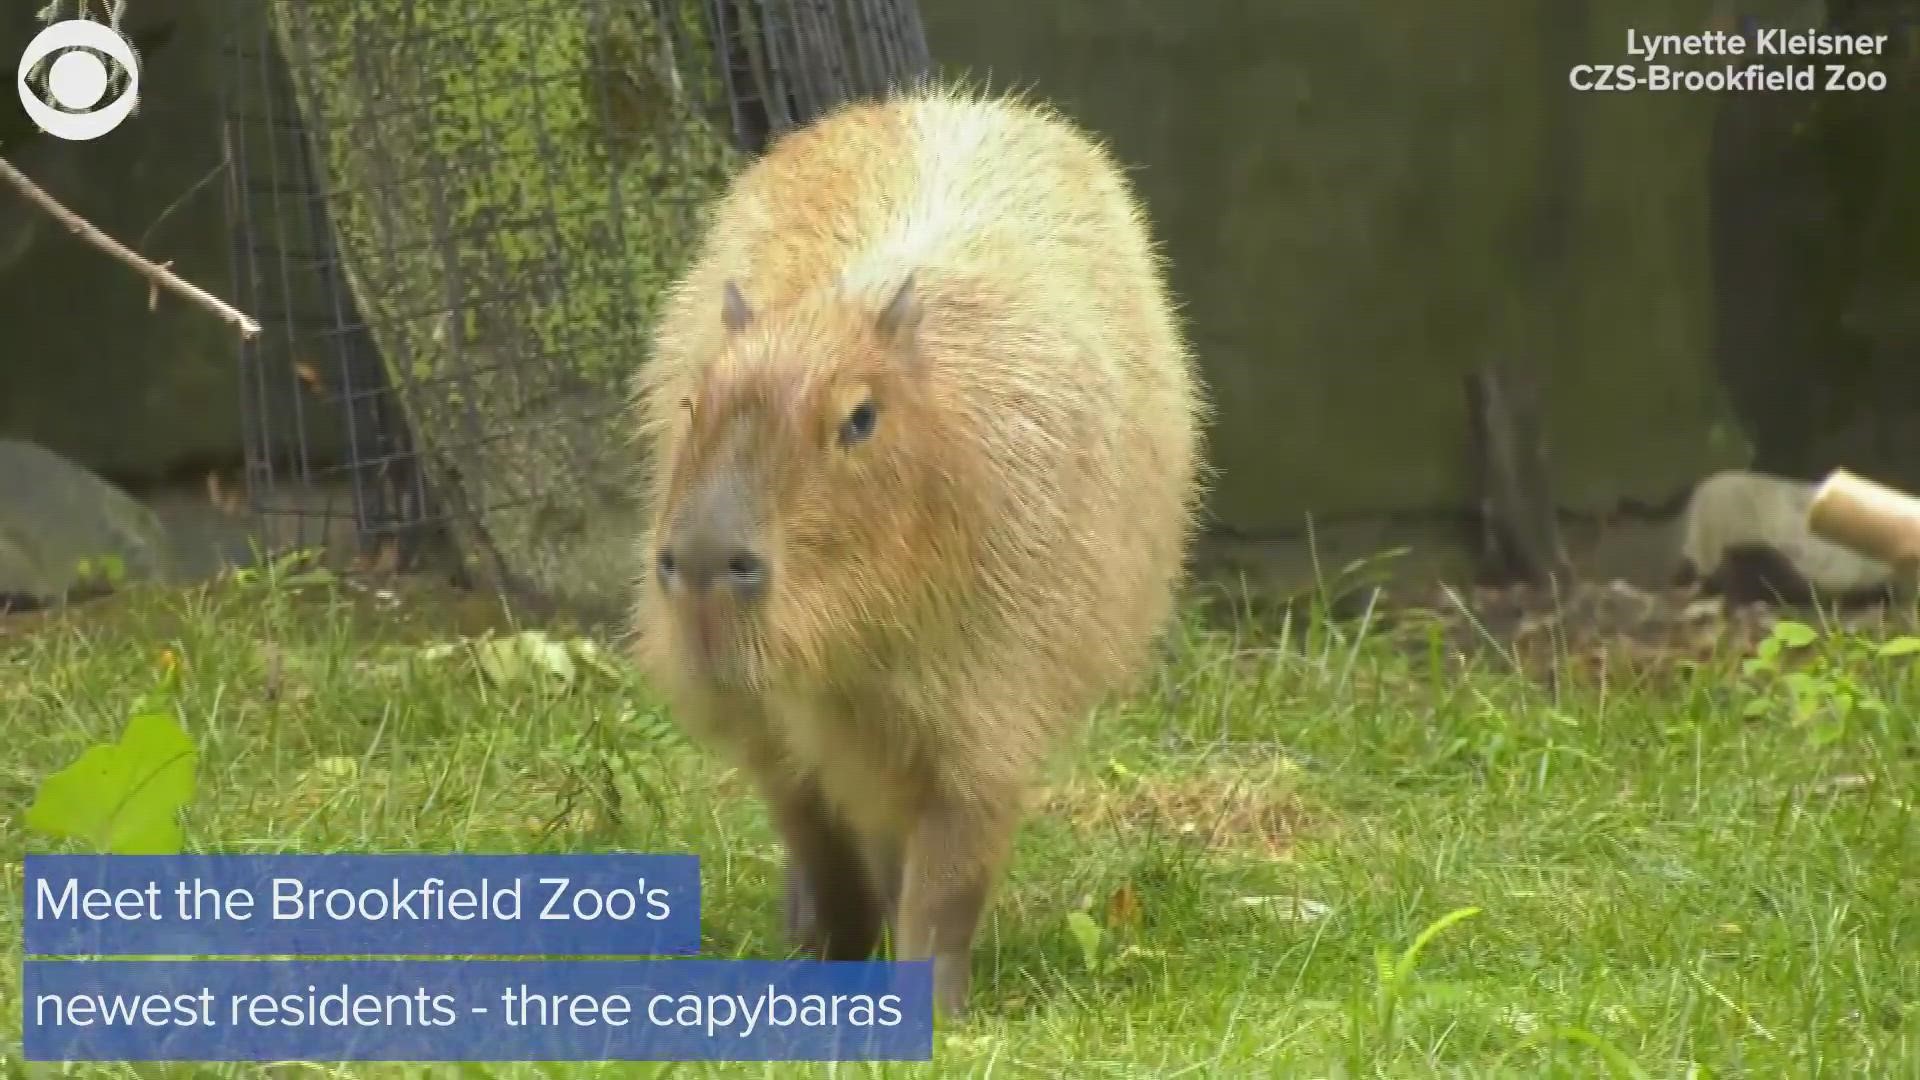 Three capybaras are now living at the Brookfield Zoo in Illinois for the first time in over 40 years. Check out the zoo's newest residents